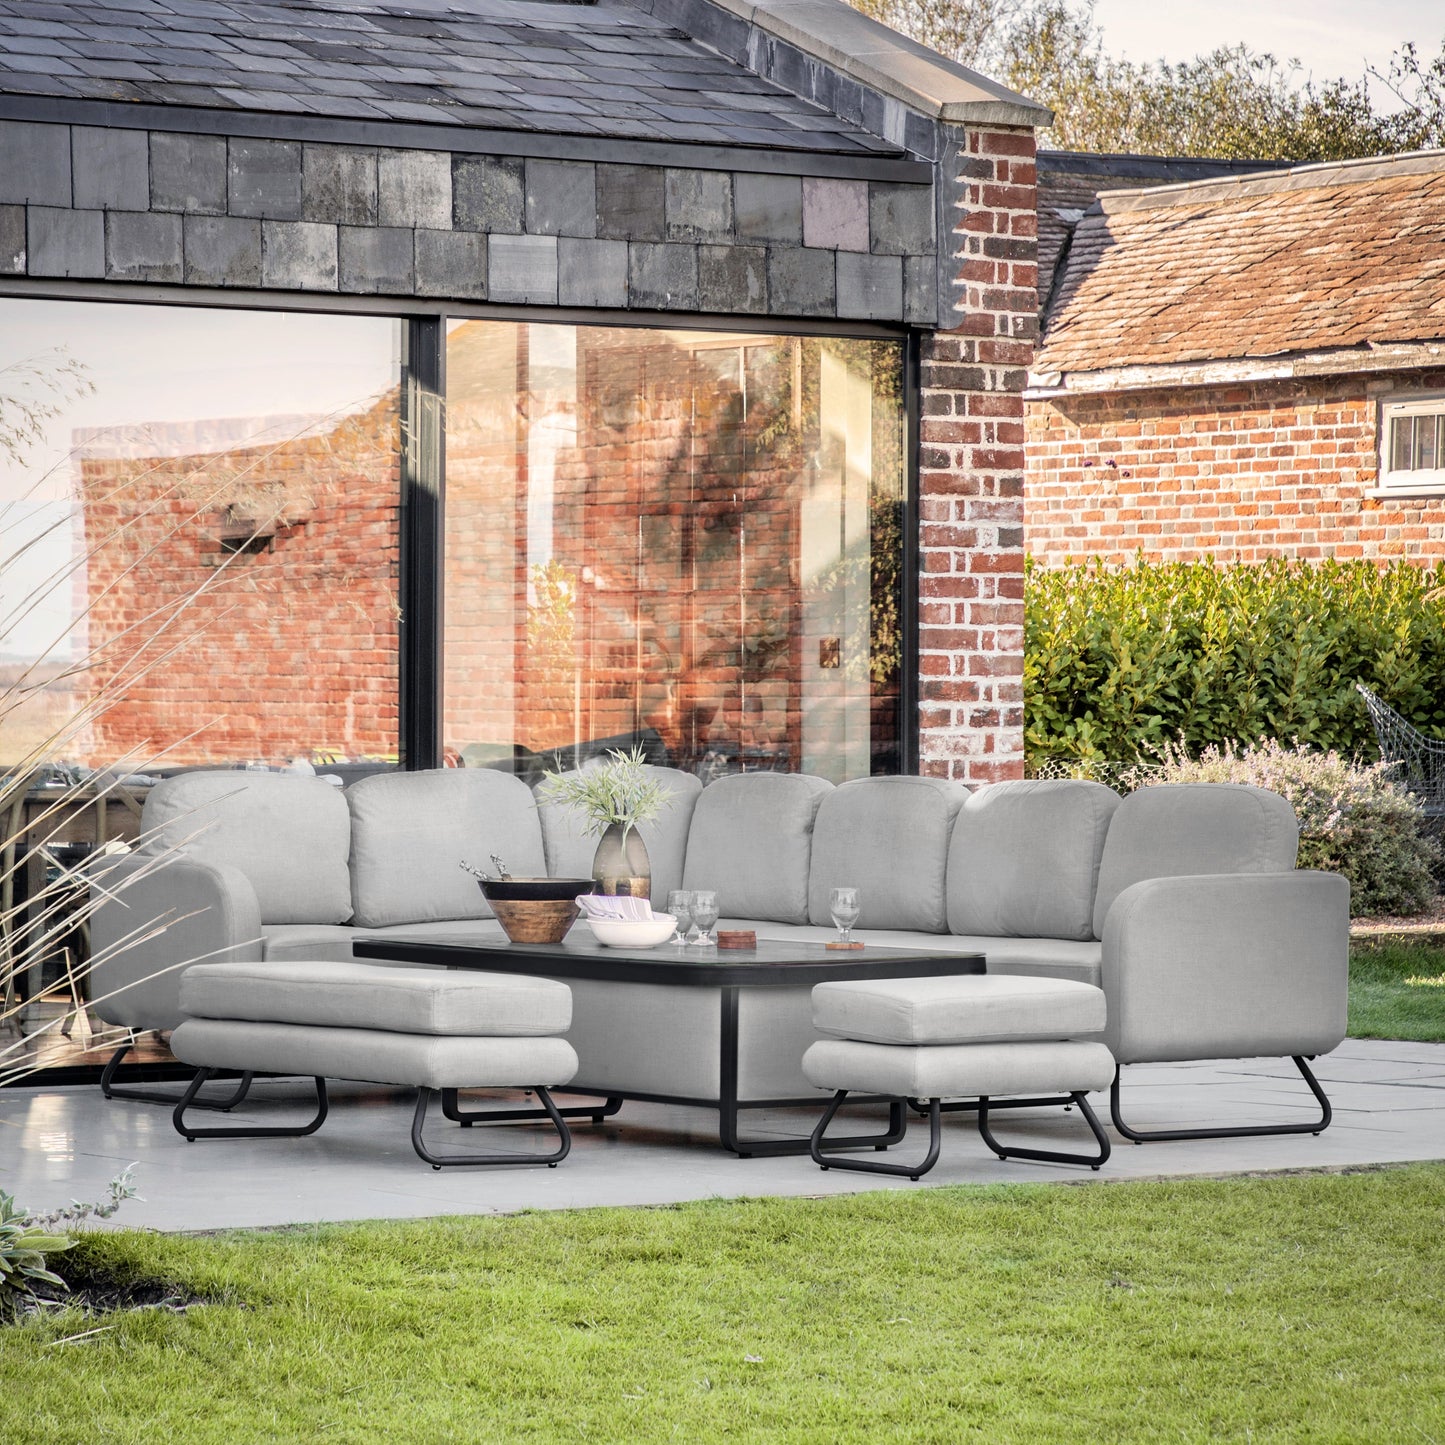 Load image into Gallery viewer, A grey Topsham Rectangle Dining Set Rising Table Slate sectional sofa set in a garden from Kikiathome.co.uk, perfect for interior decor.
